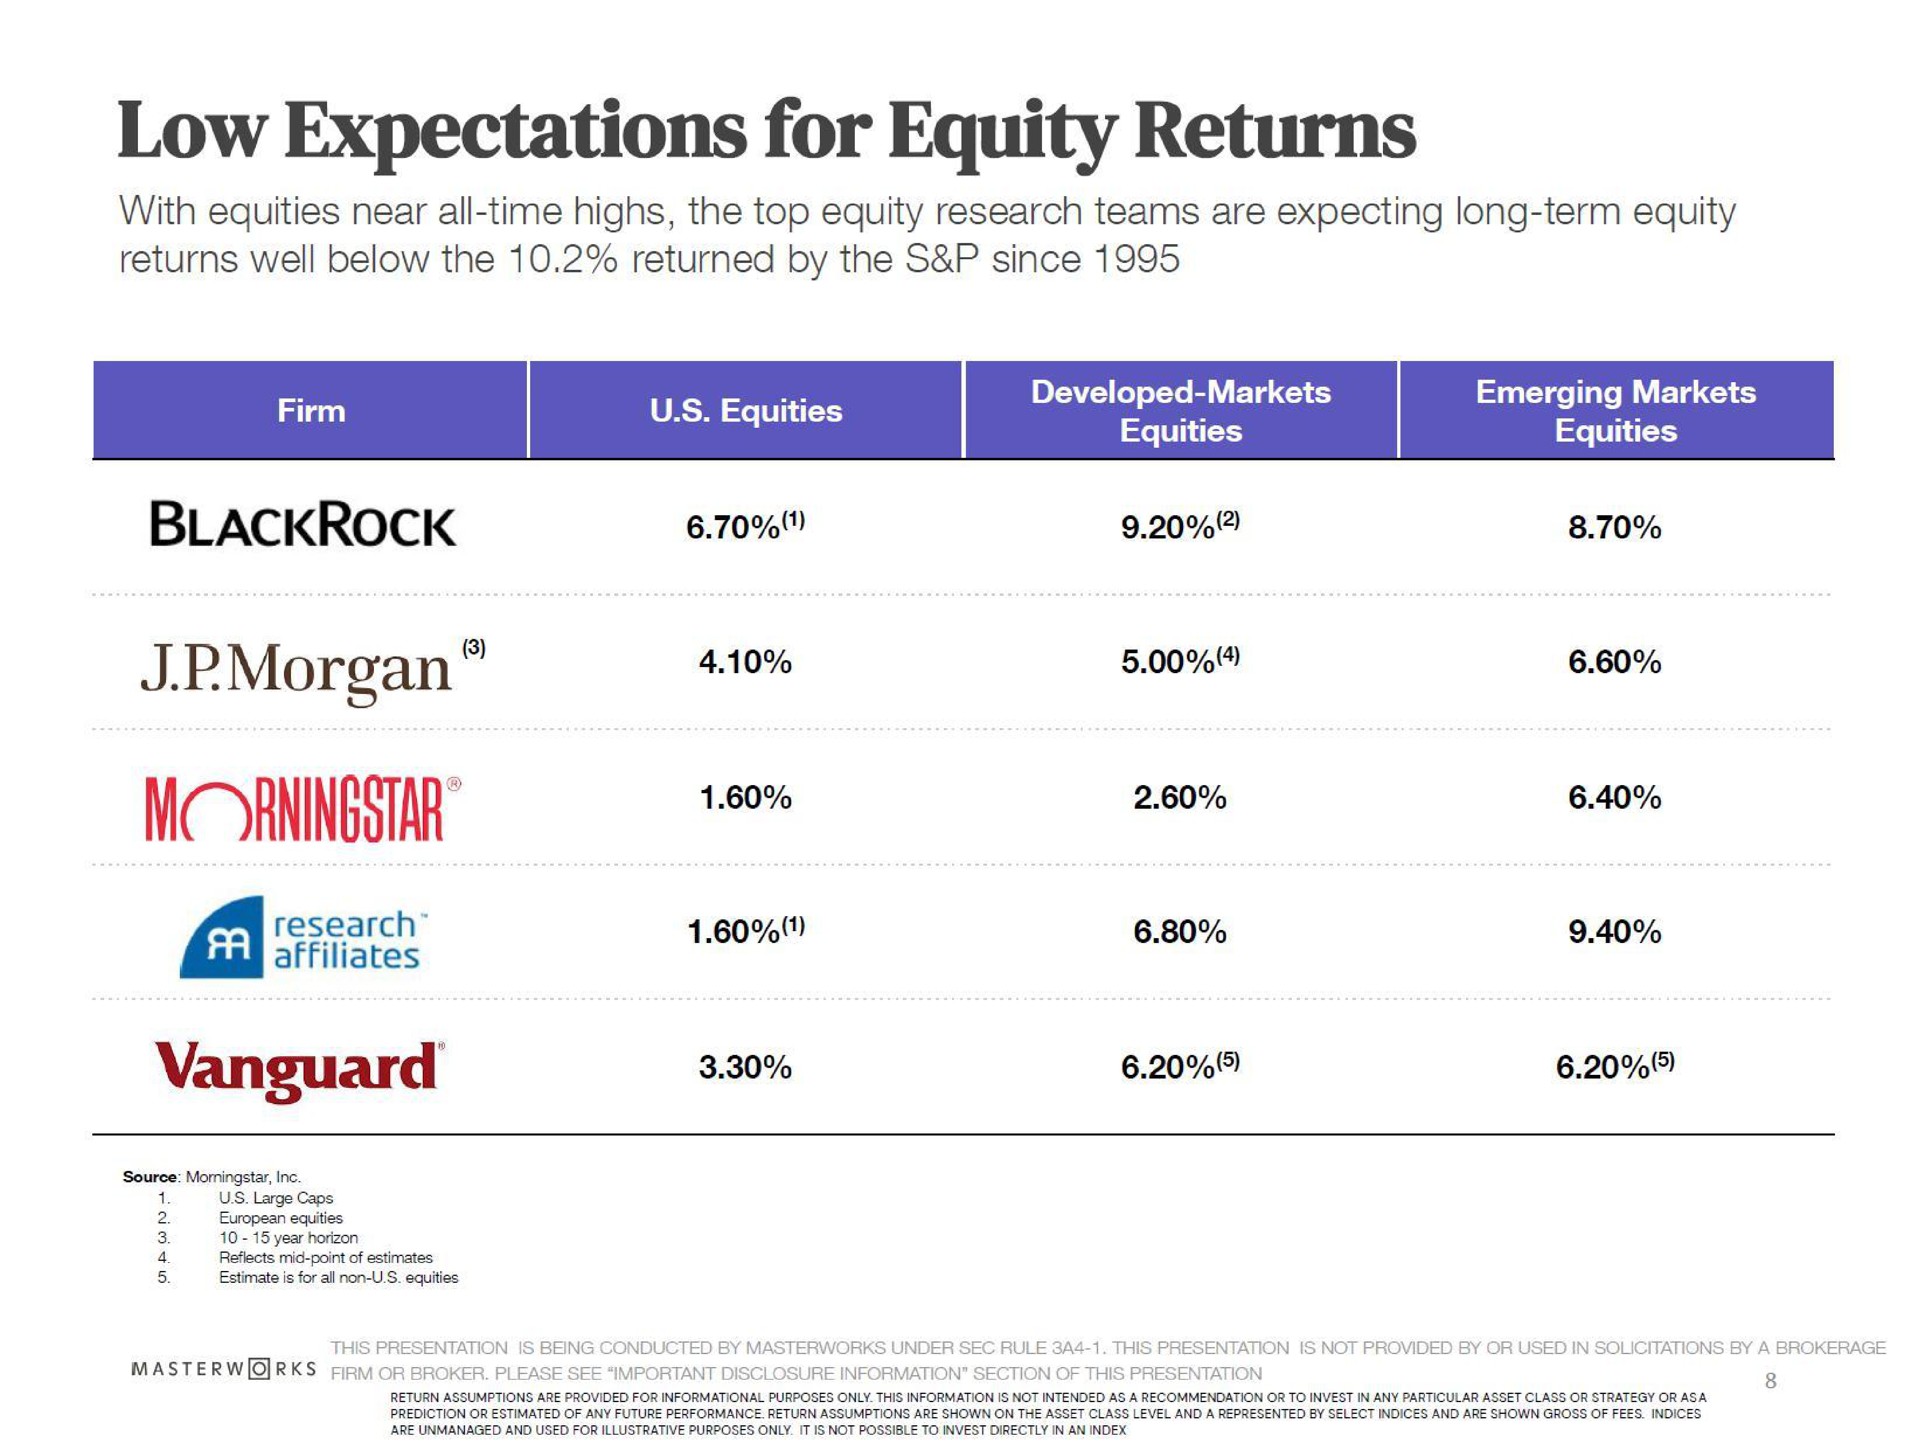 low expectations for equity returns a morgan vanguard | Masterworks